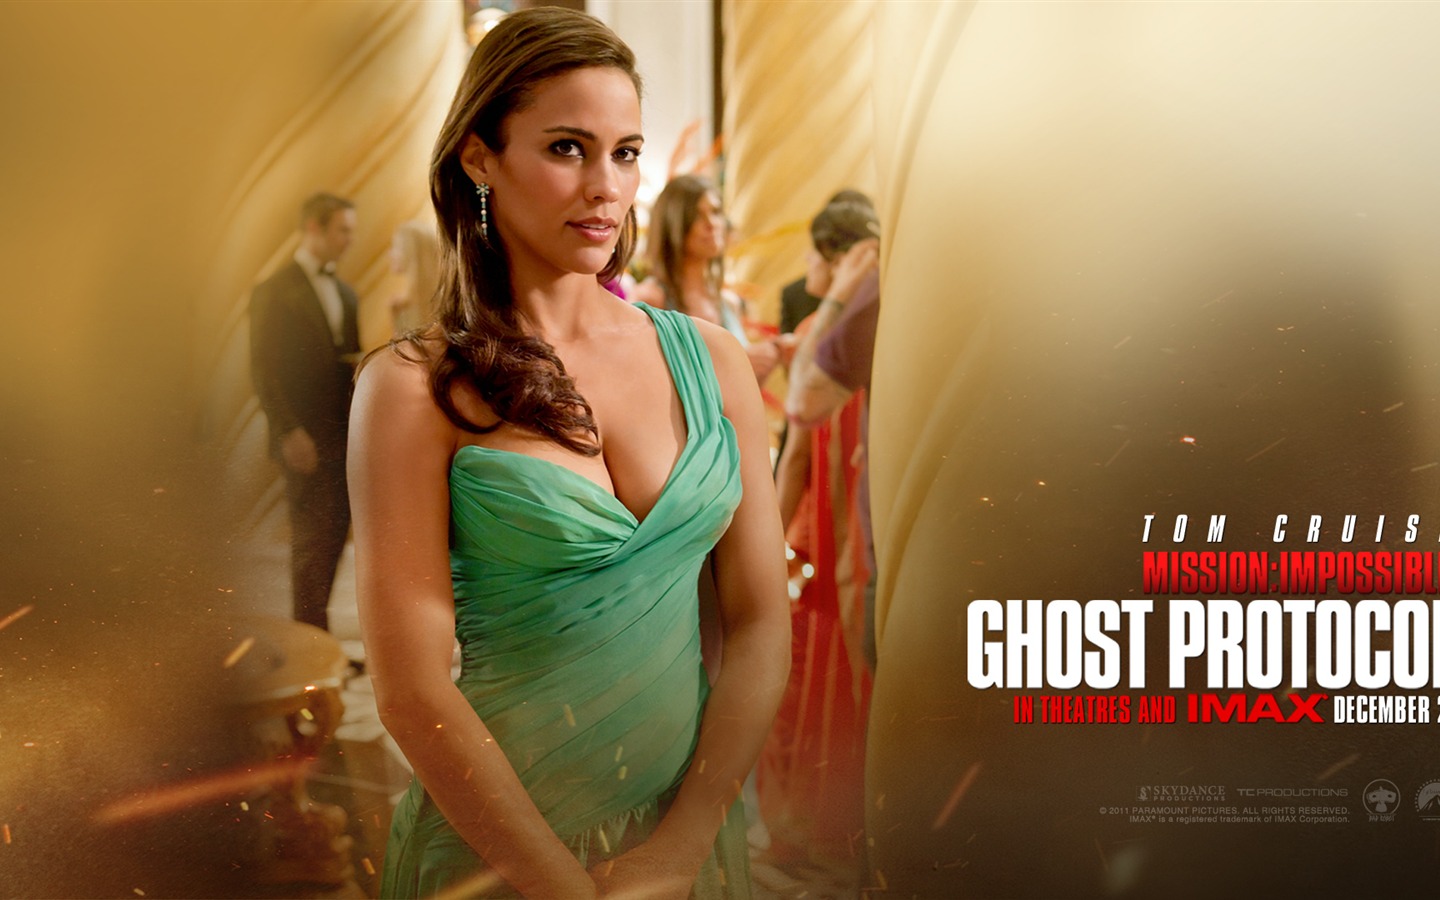 Mission: Impossible - Ghost Protocol 碟中谍4 高清壁纸7 - 1440x900